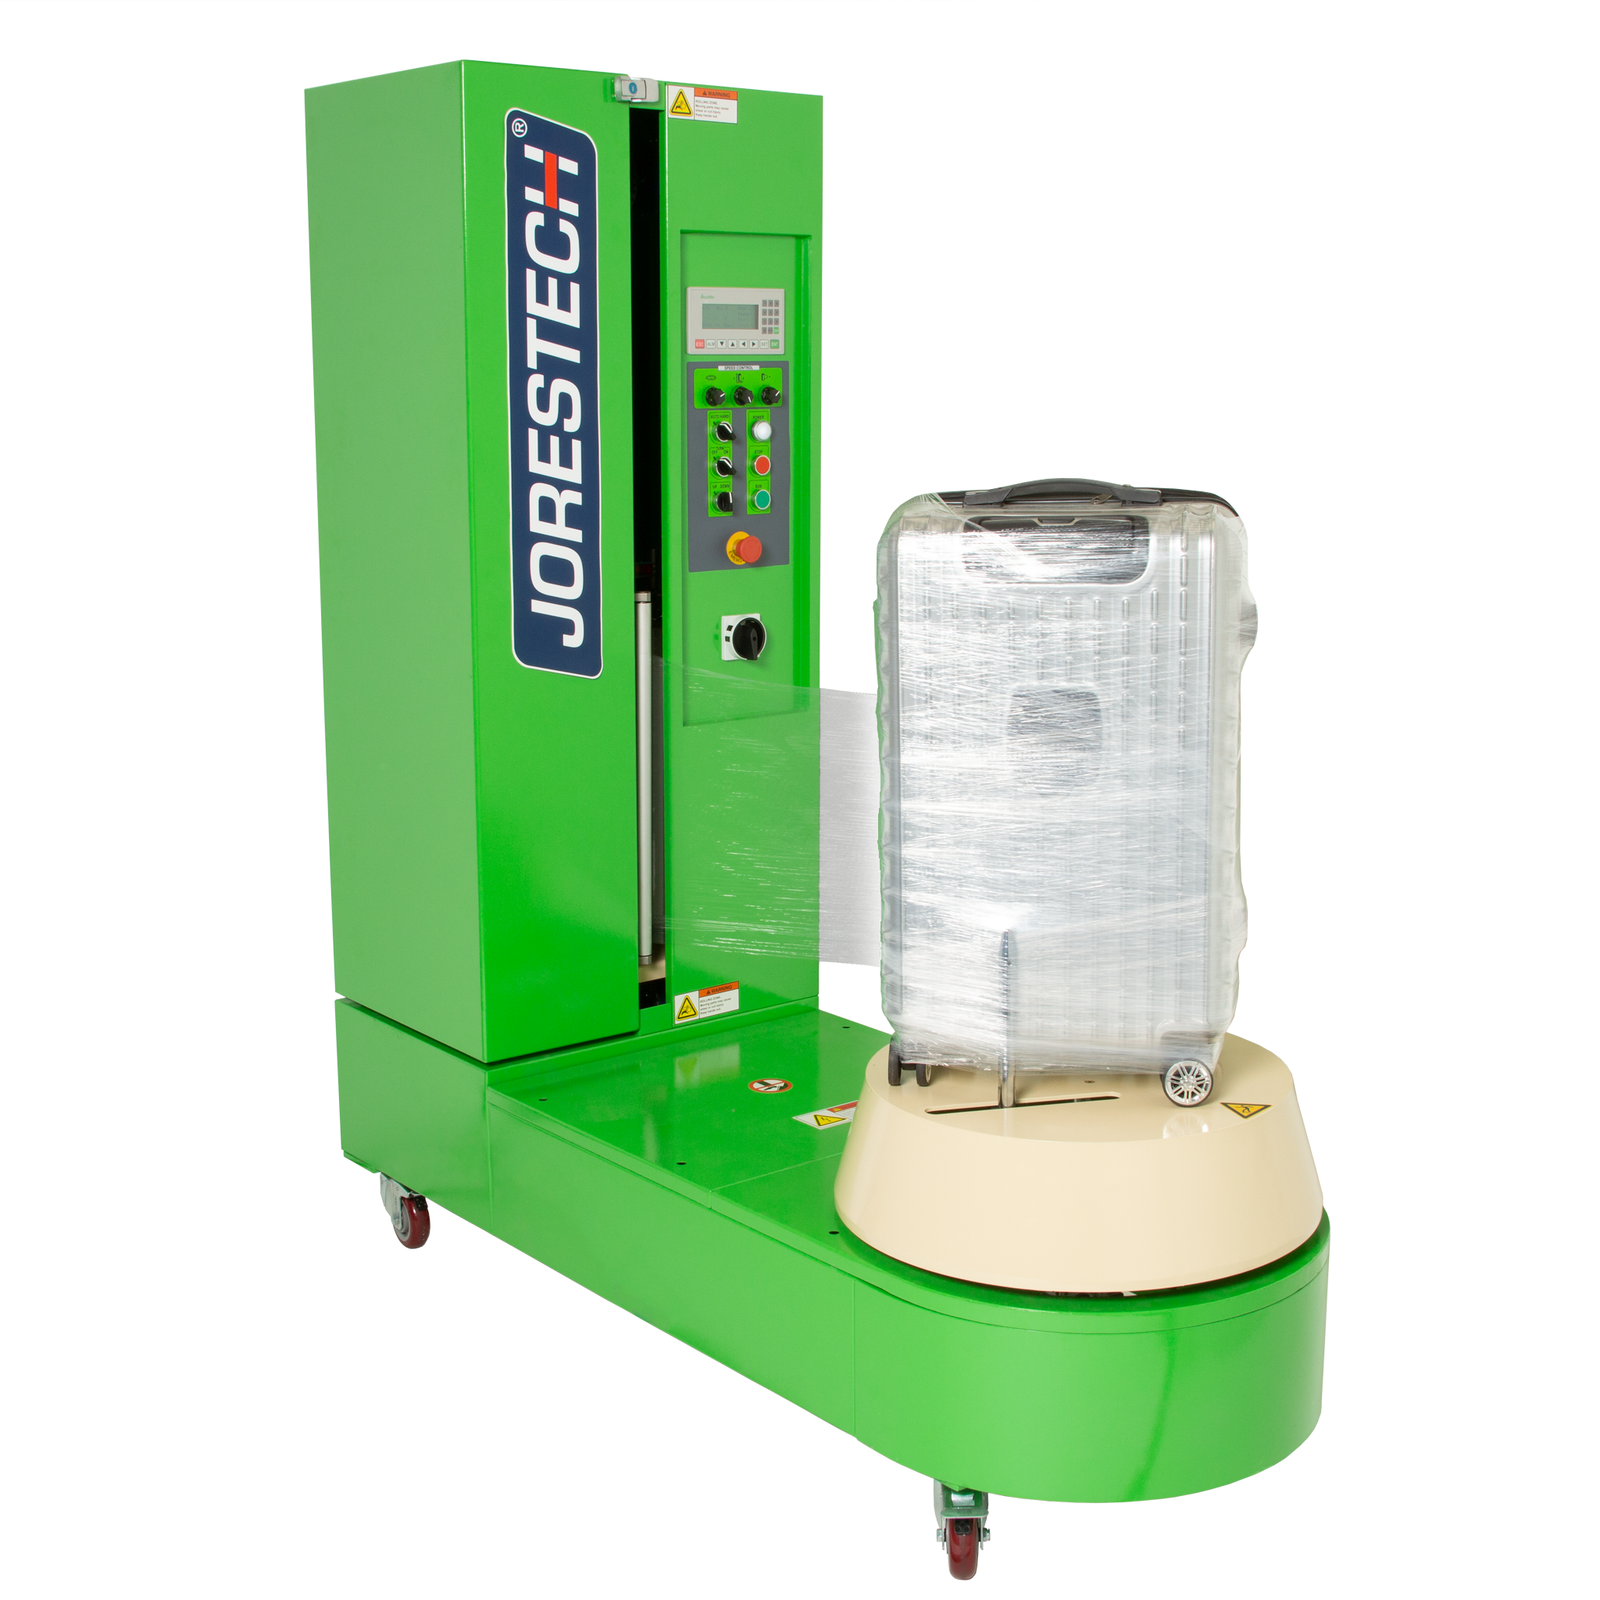 Green stretch Wrapping machine with a suitcase on the turntable being wrapped with stretch film over a white background